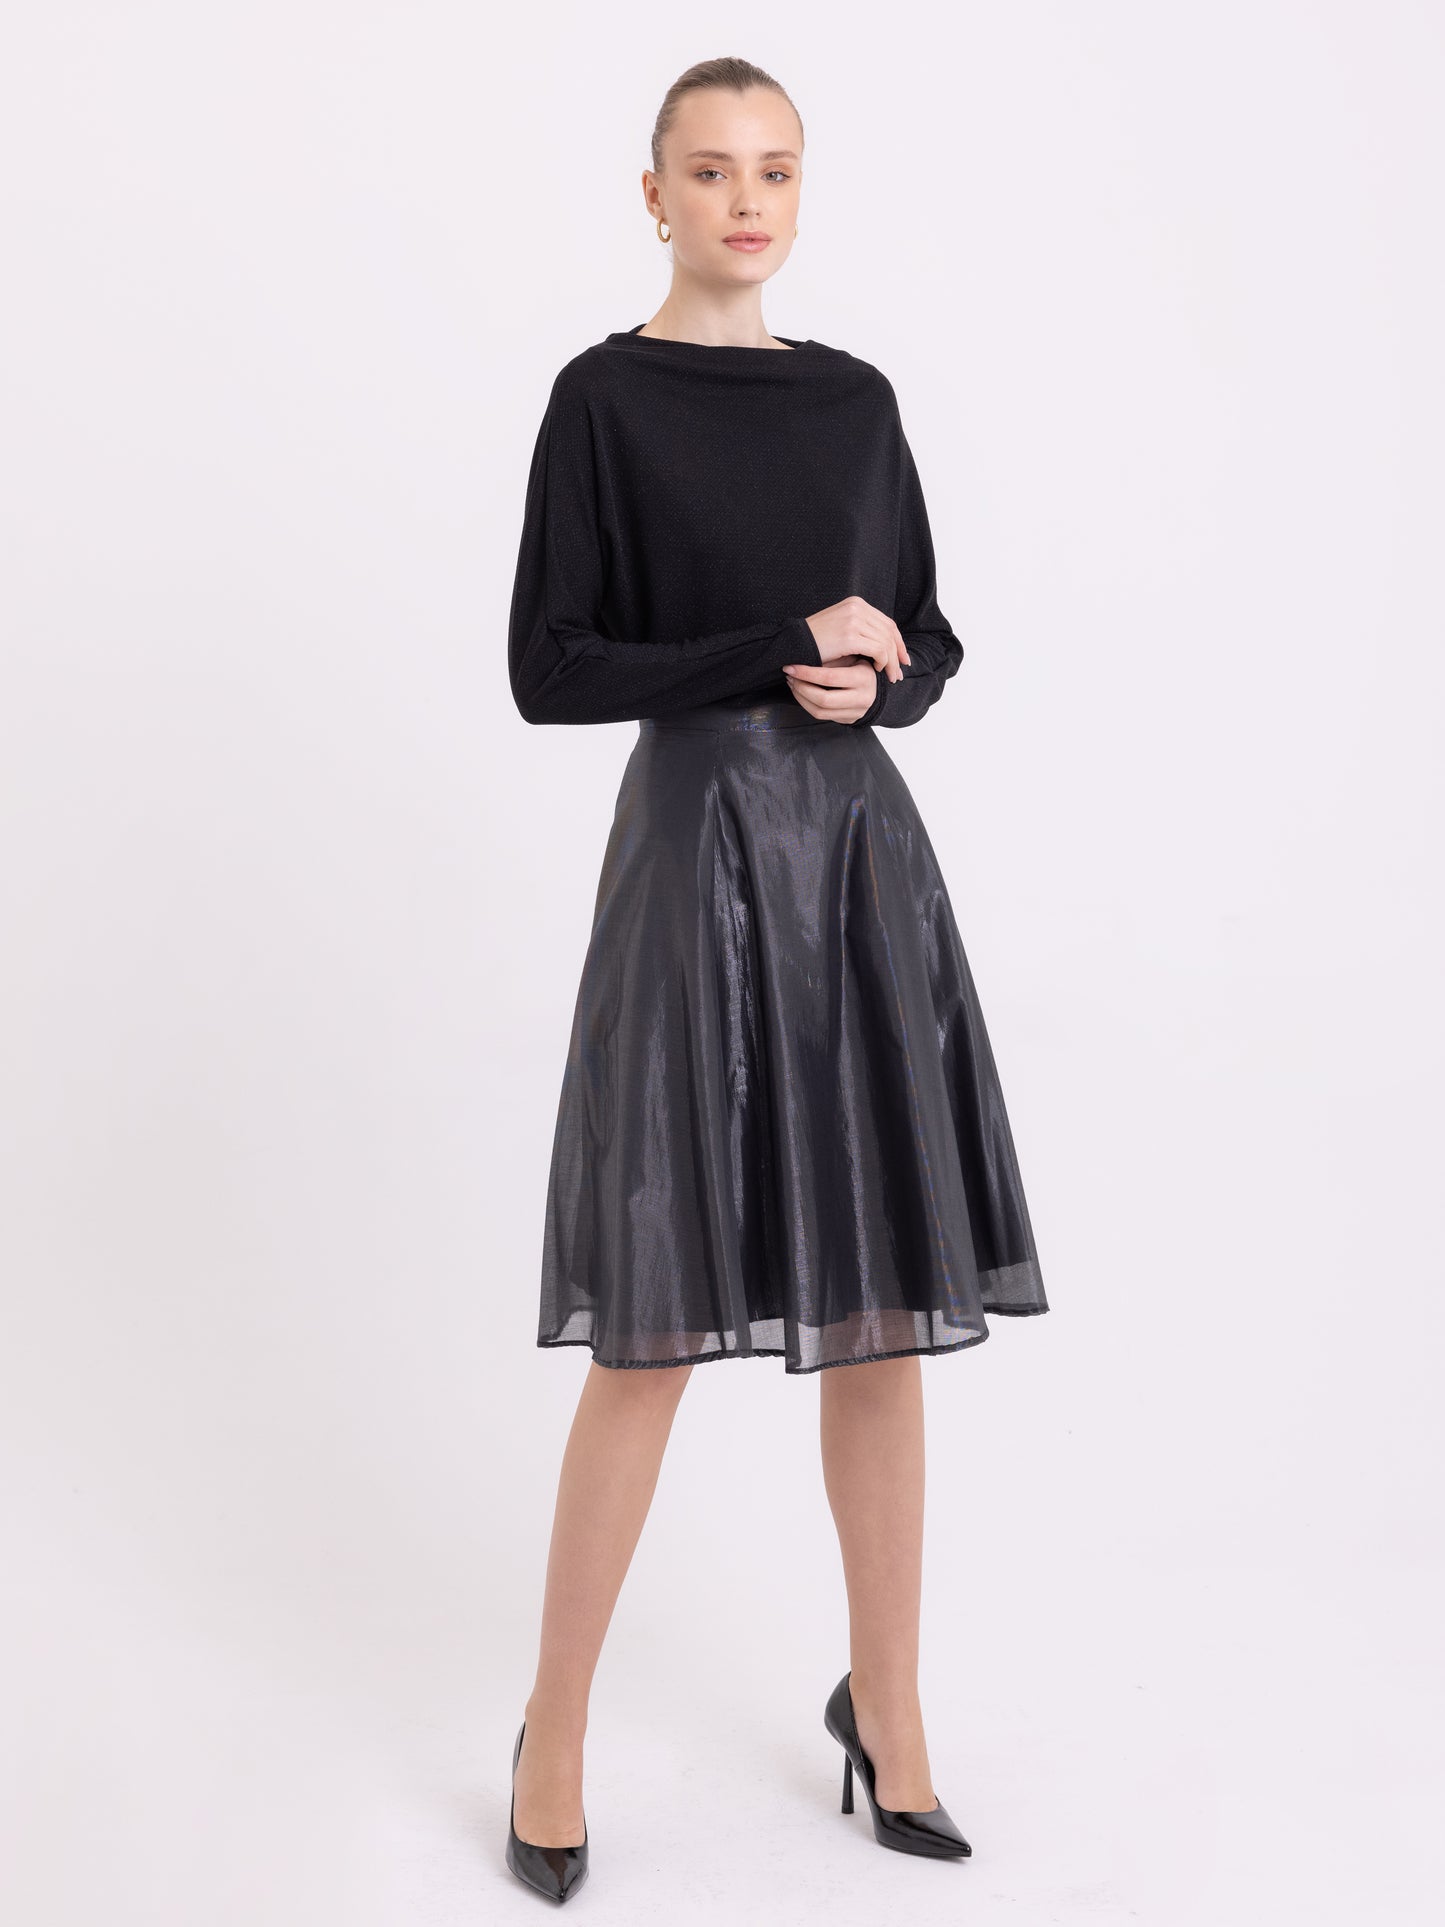 Bat silhouette black lurex top, with cowl neck and long sleeves. Paired with a knee length shiny flared skirt.